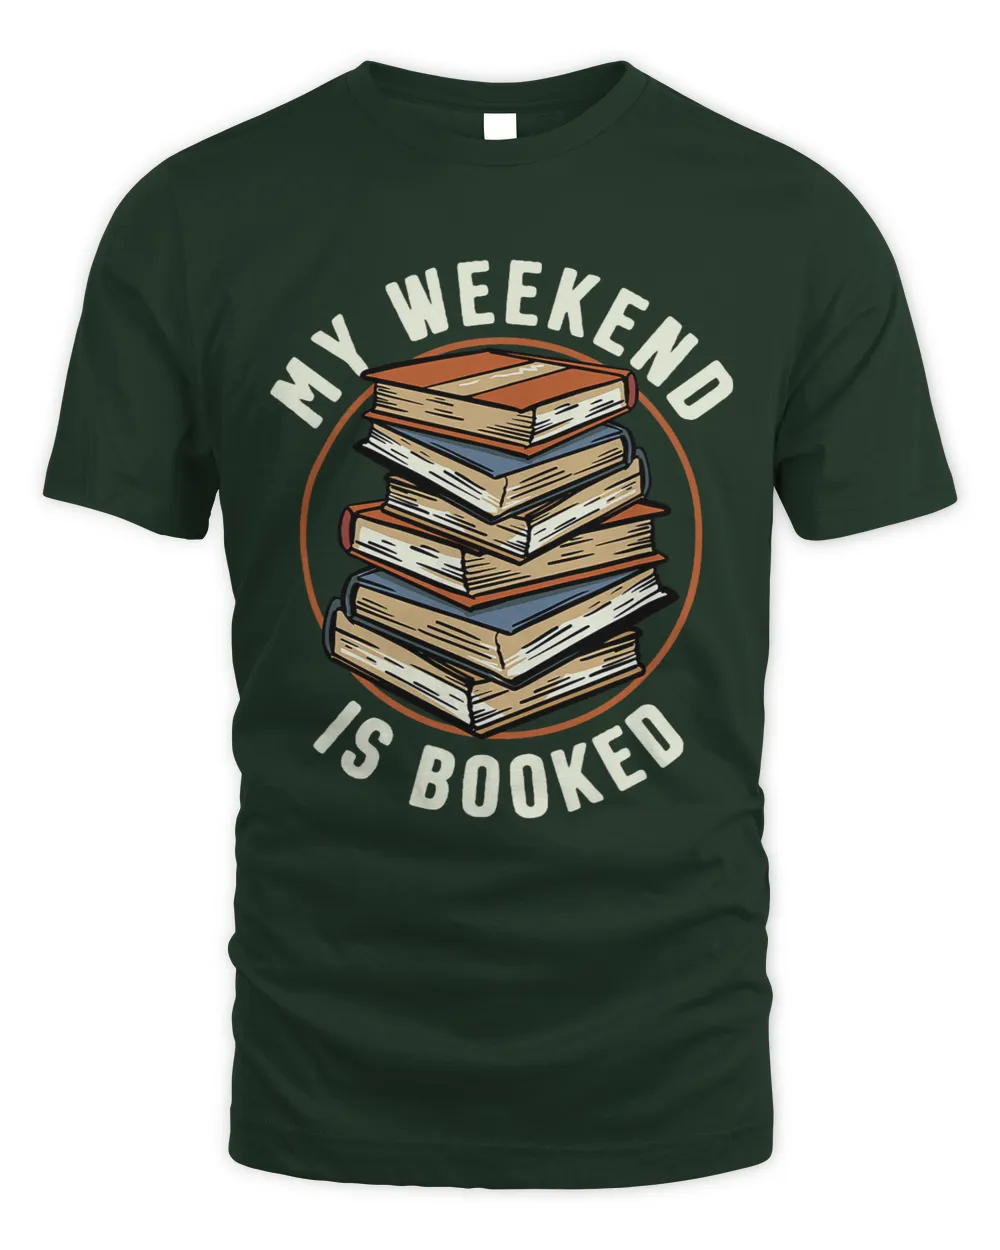 My weekend is Booked For those who Love Books and Reading